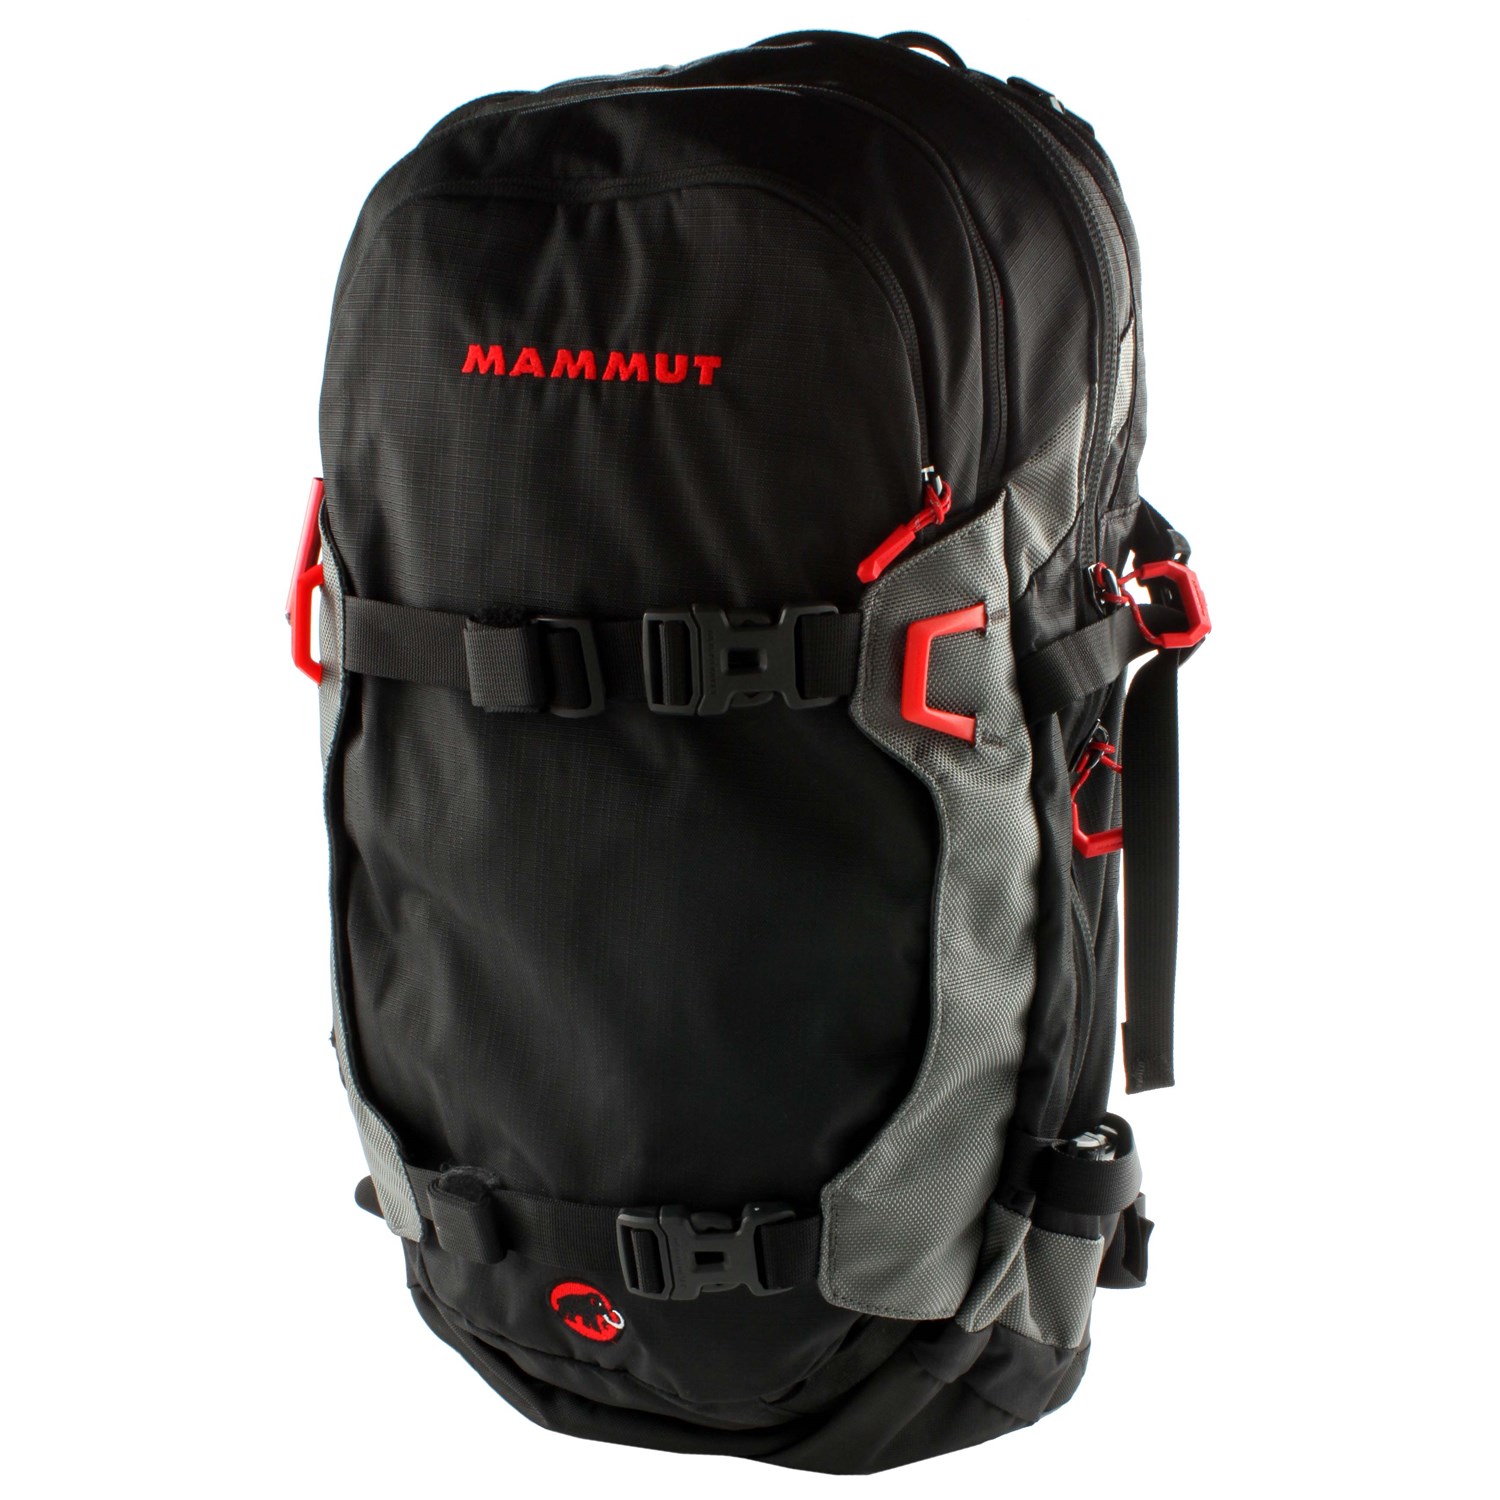 Mammut Ride R.A.S. Airbag Backpack Included) | evo